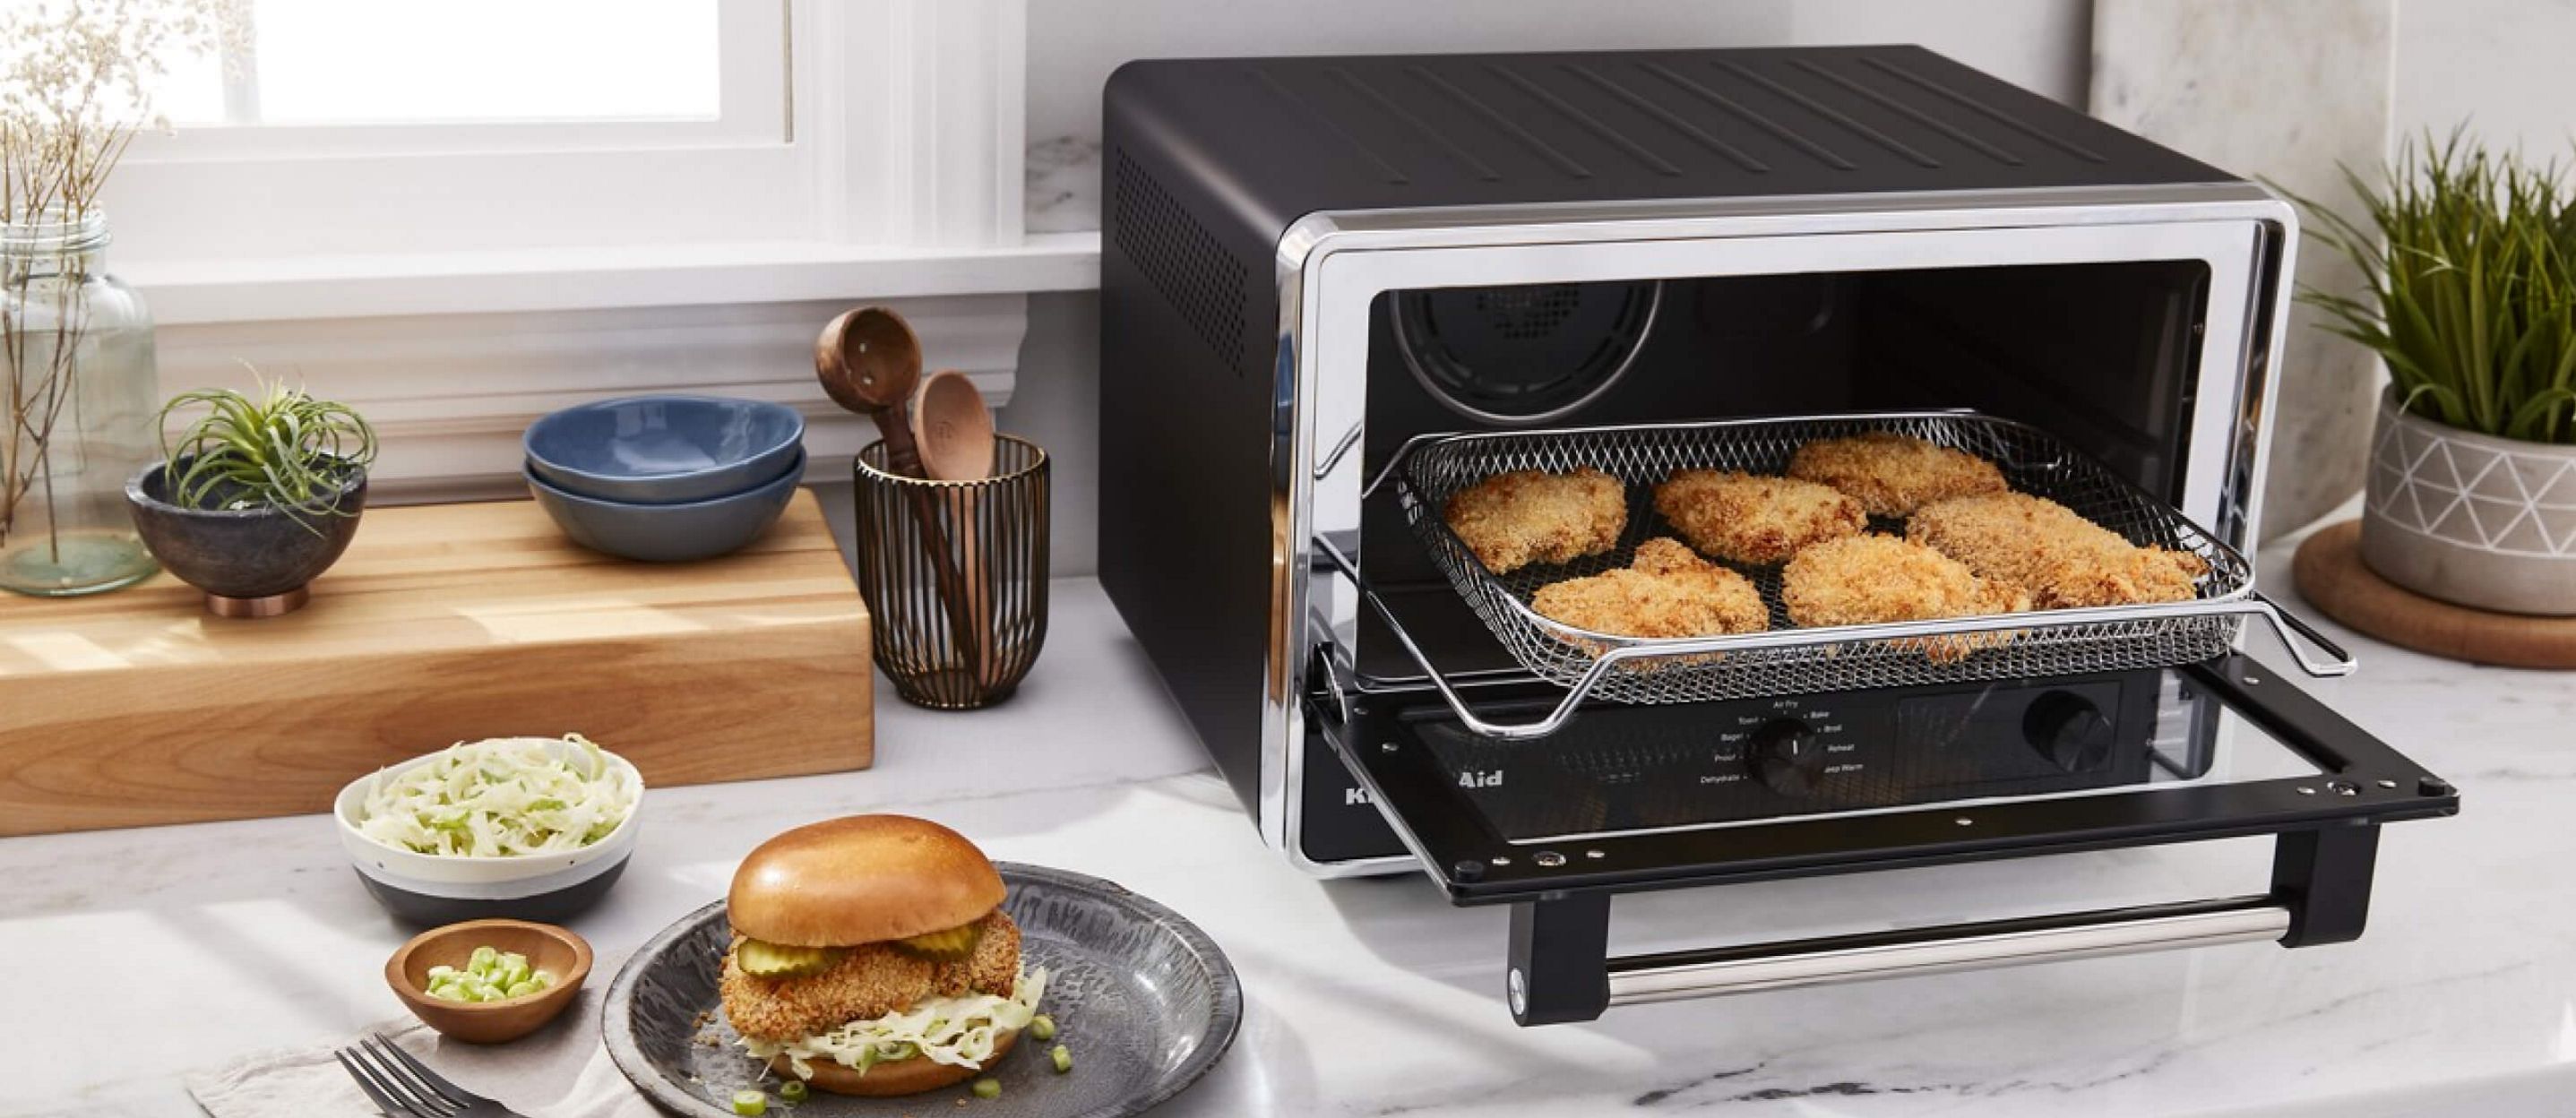 A Digital Countertop Oven with Air Dry cooking crispy chicken and a crispy chicken sandwich sitting on a plate with ingredients next to it.